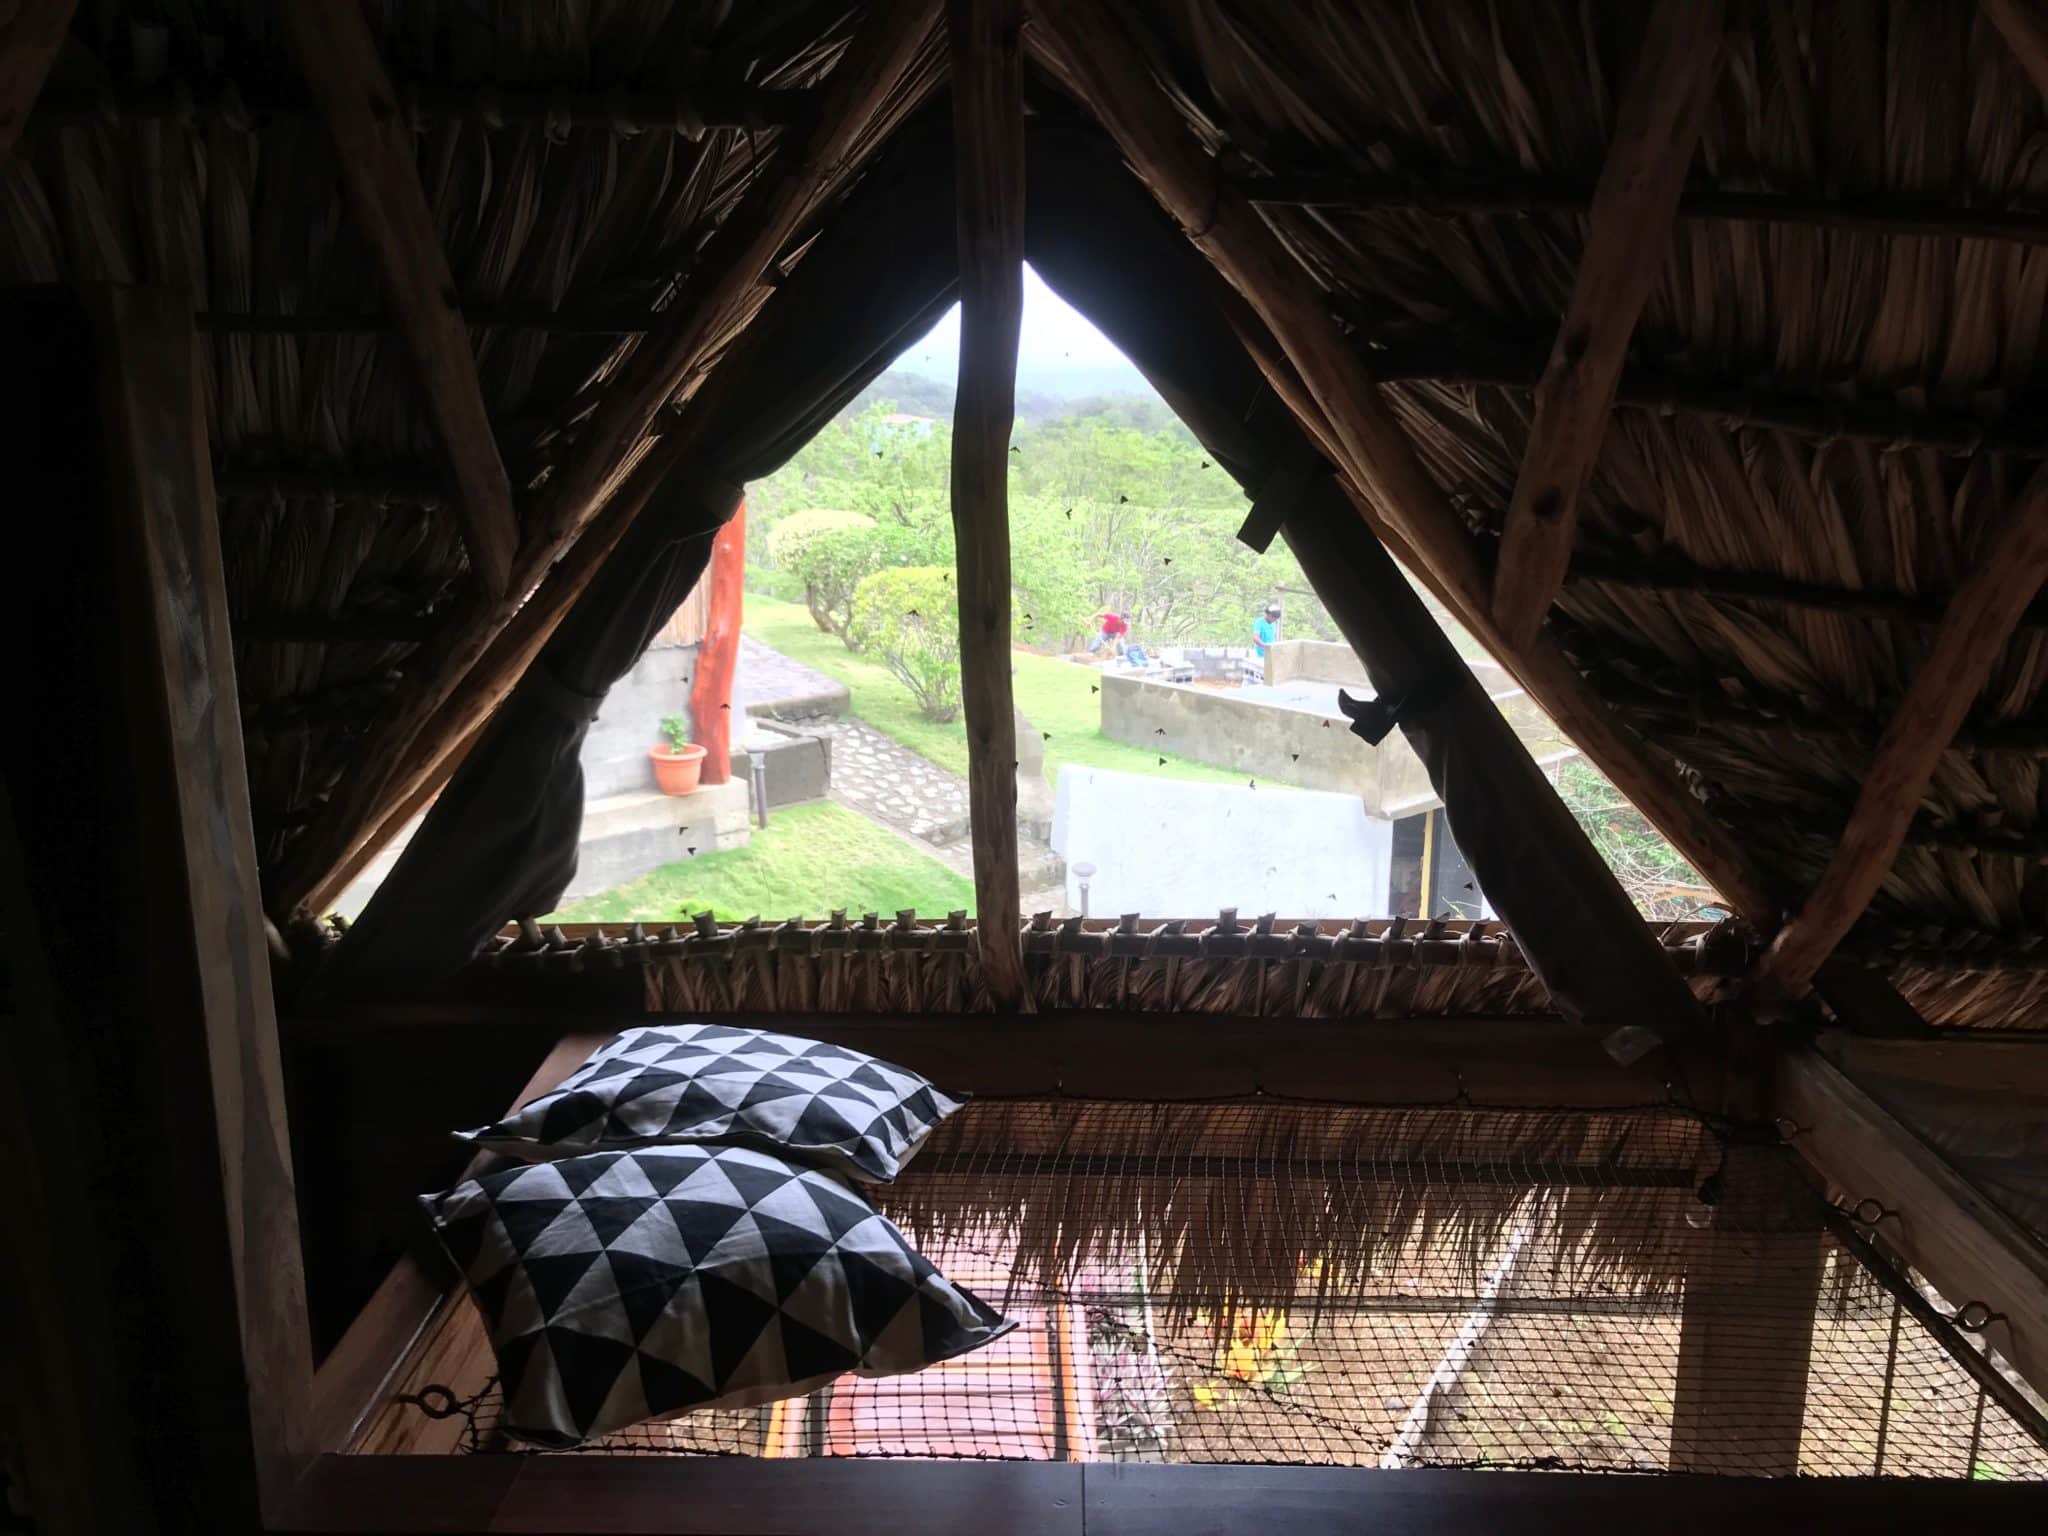 The view from the hammock balcony in large cabana room